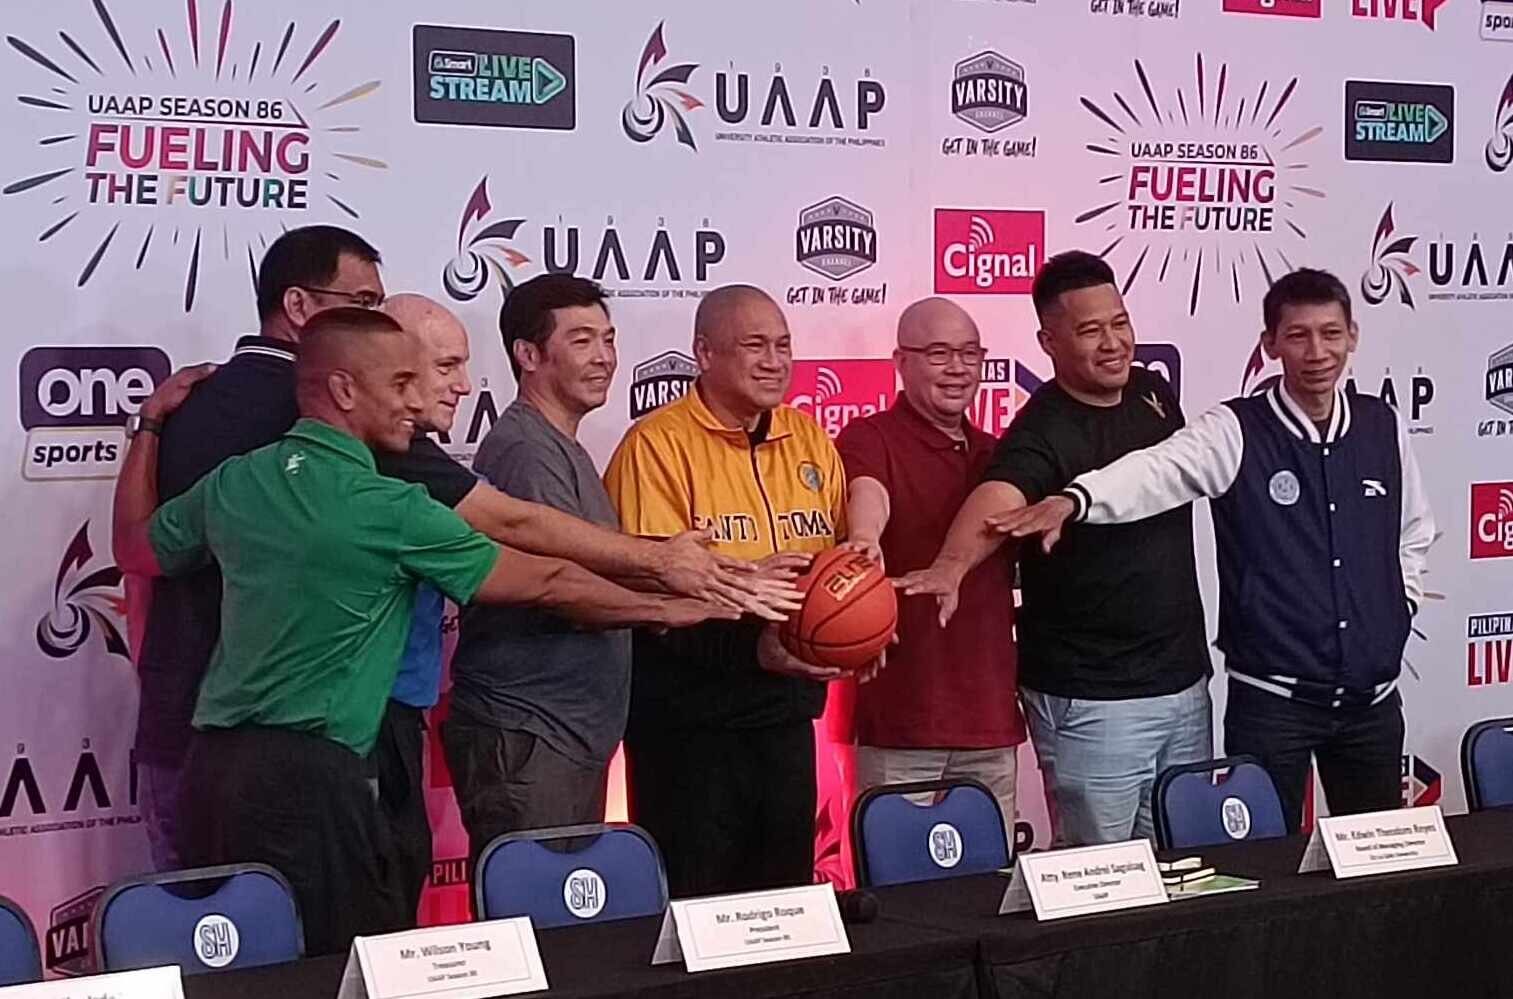 No AI sportscasters in the UAAP, for now